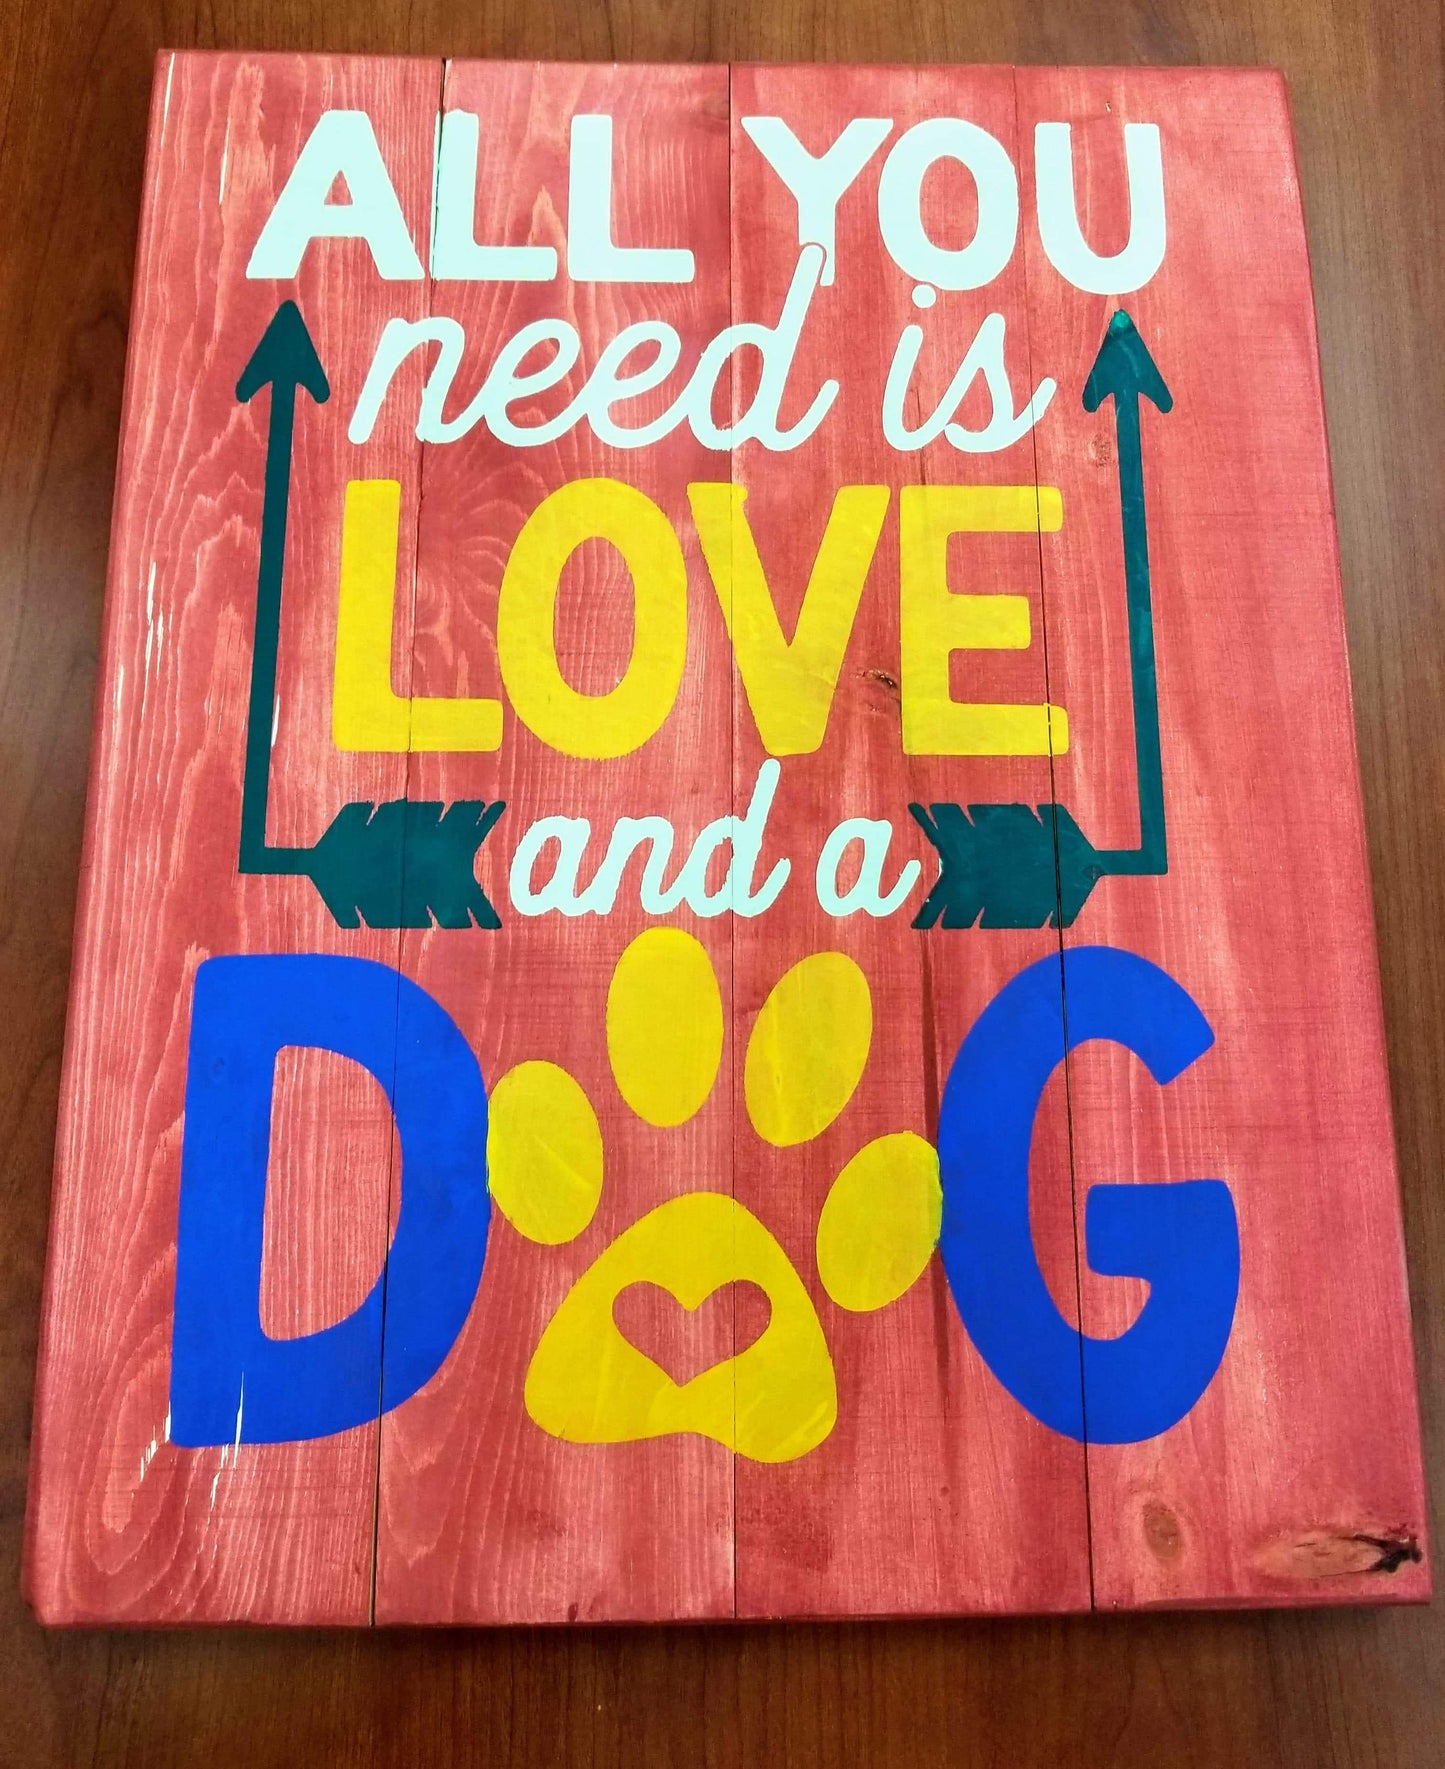 All you need is love and a dog with arrows and pawprint